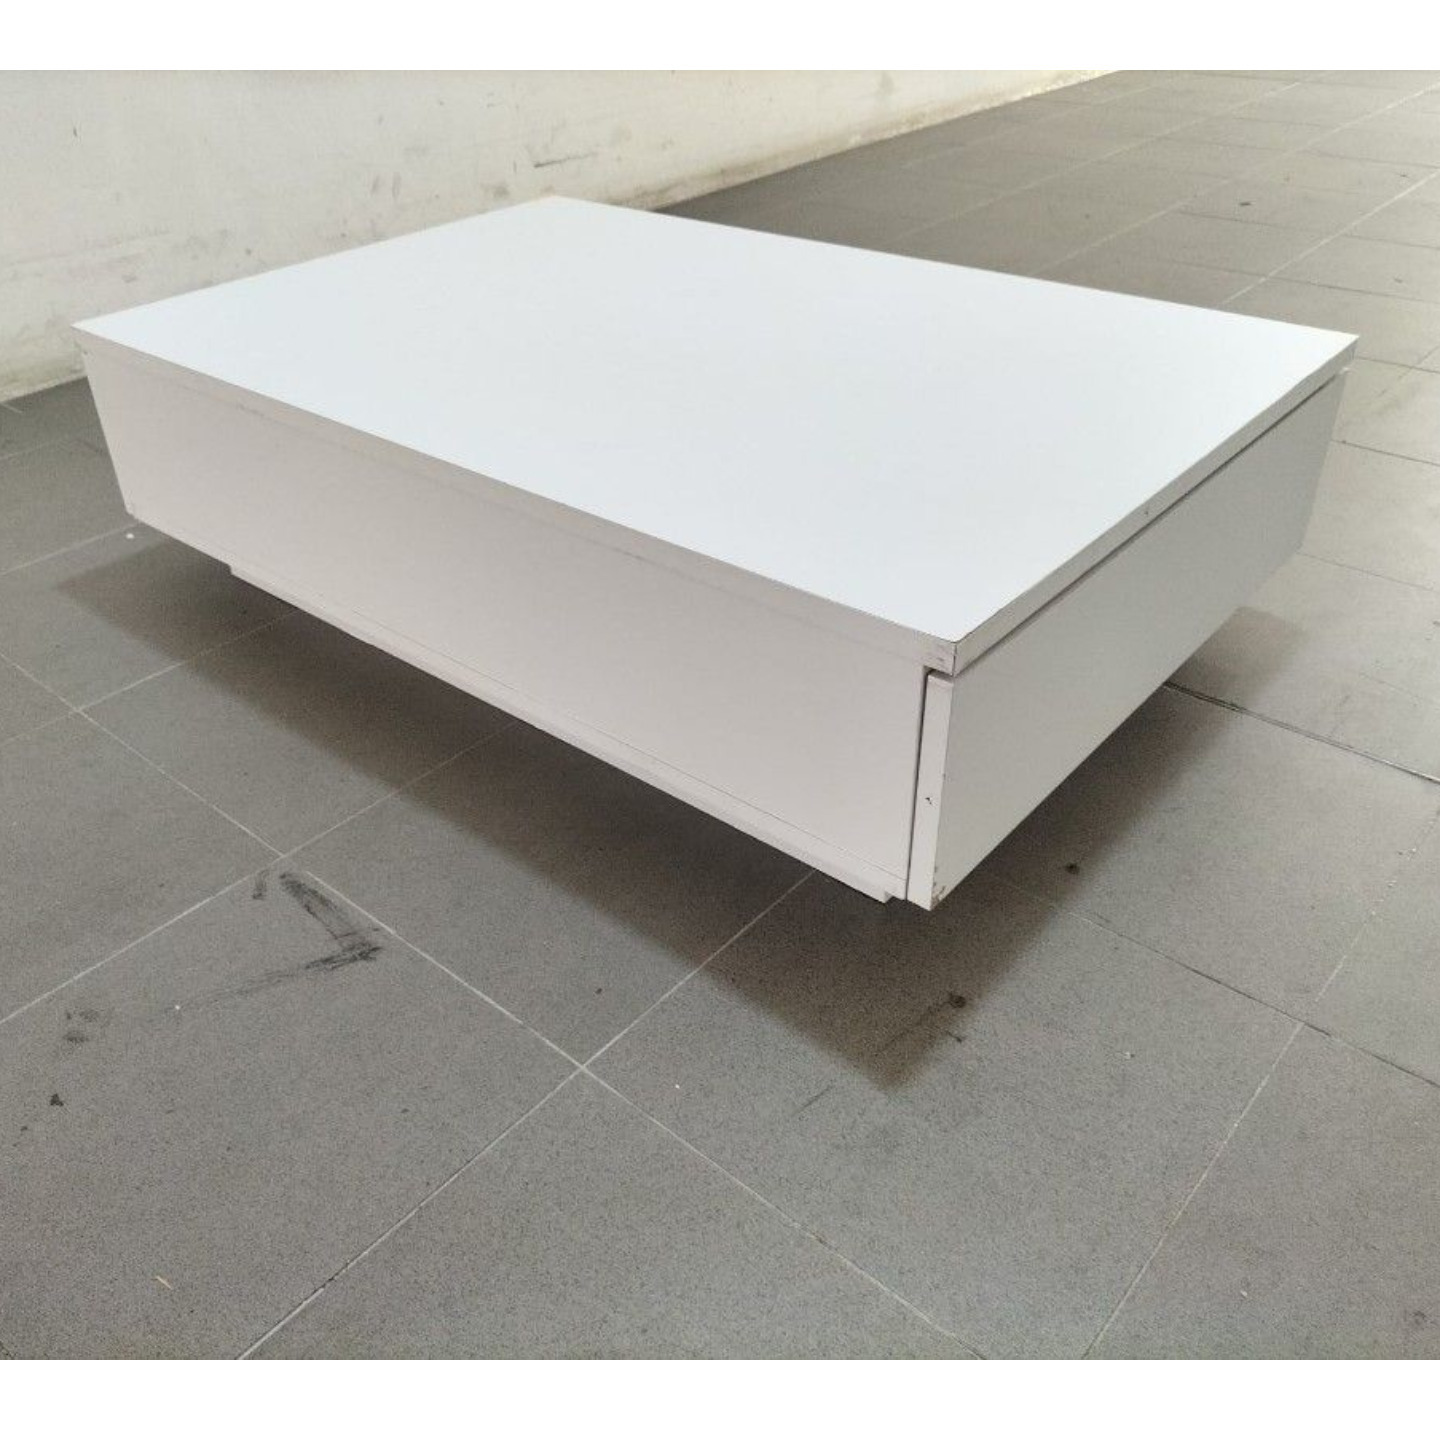 AXL Low Console Coffee Table in WHITEv